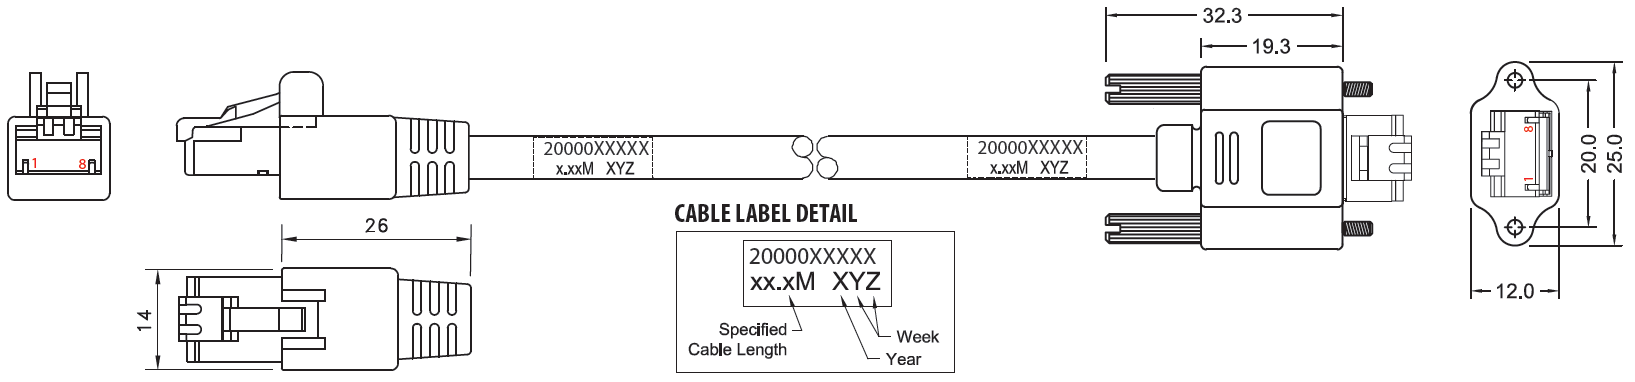 Cable Drawing